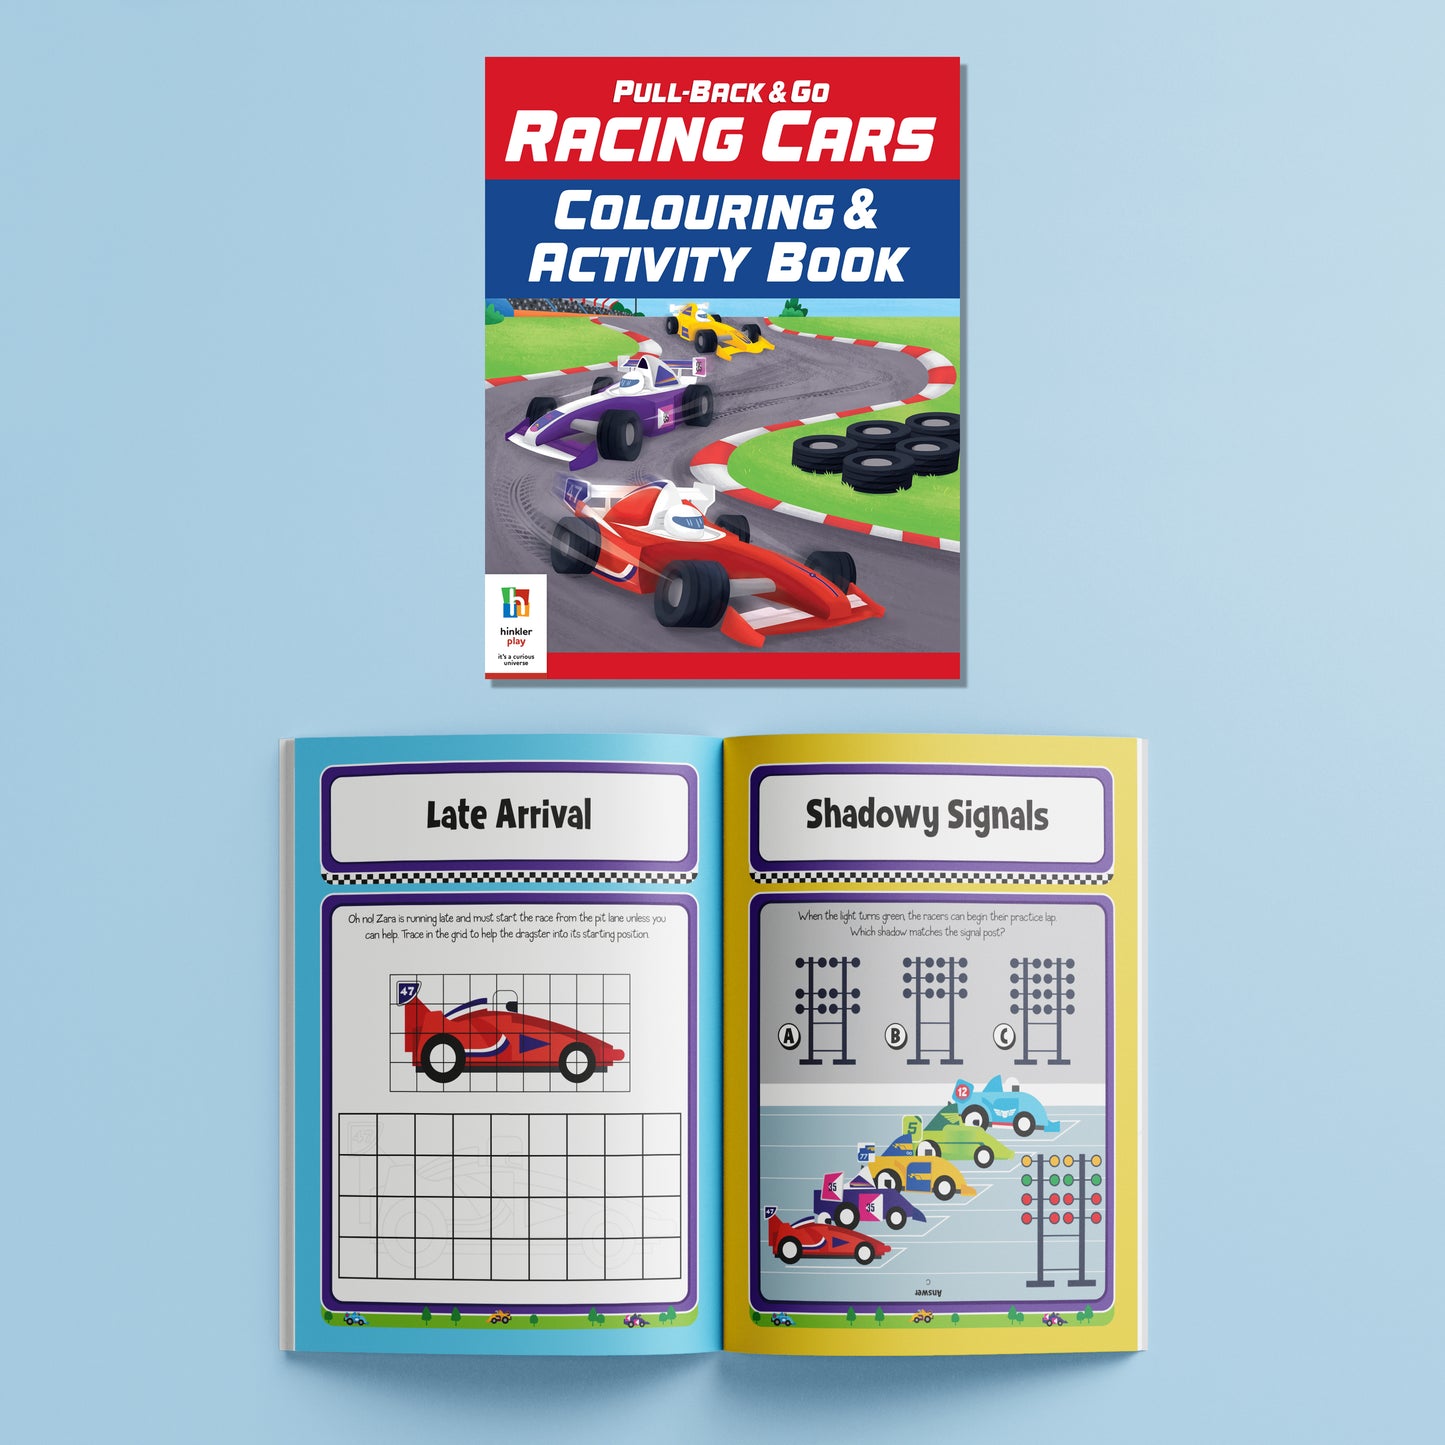 Pull-back-and-go Kit Racing Cars